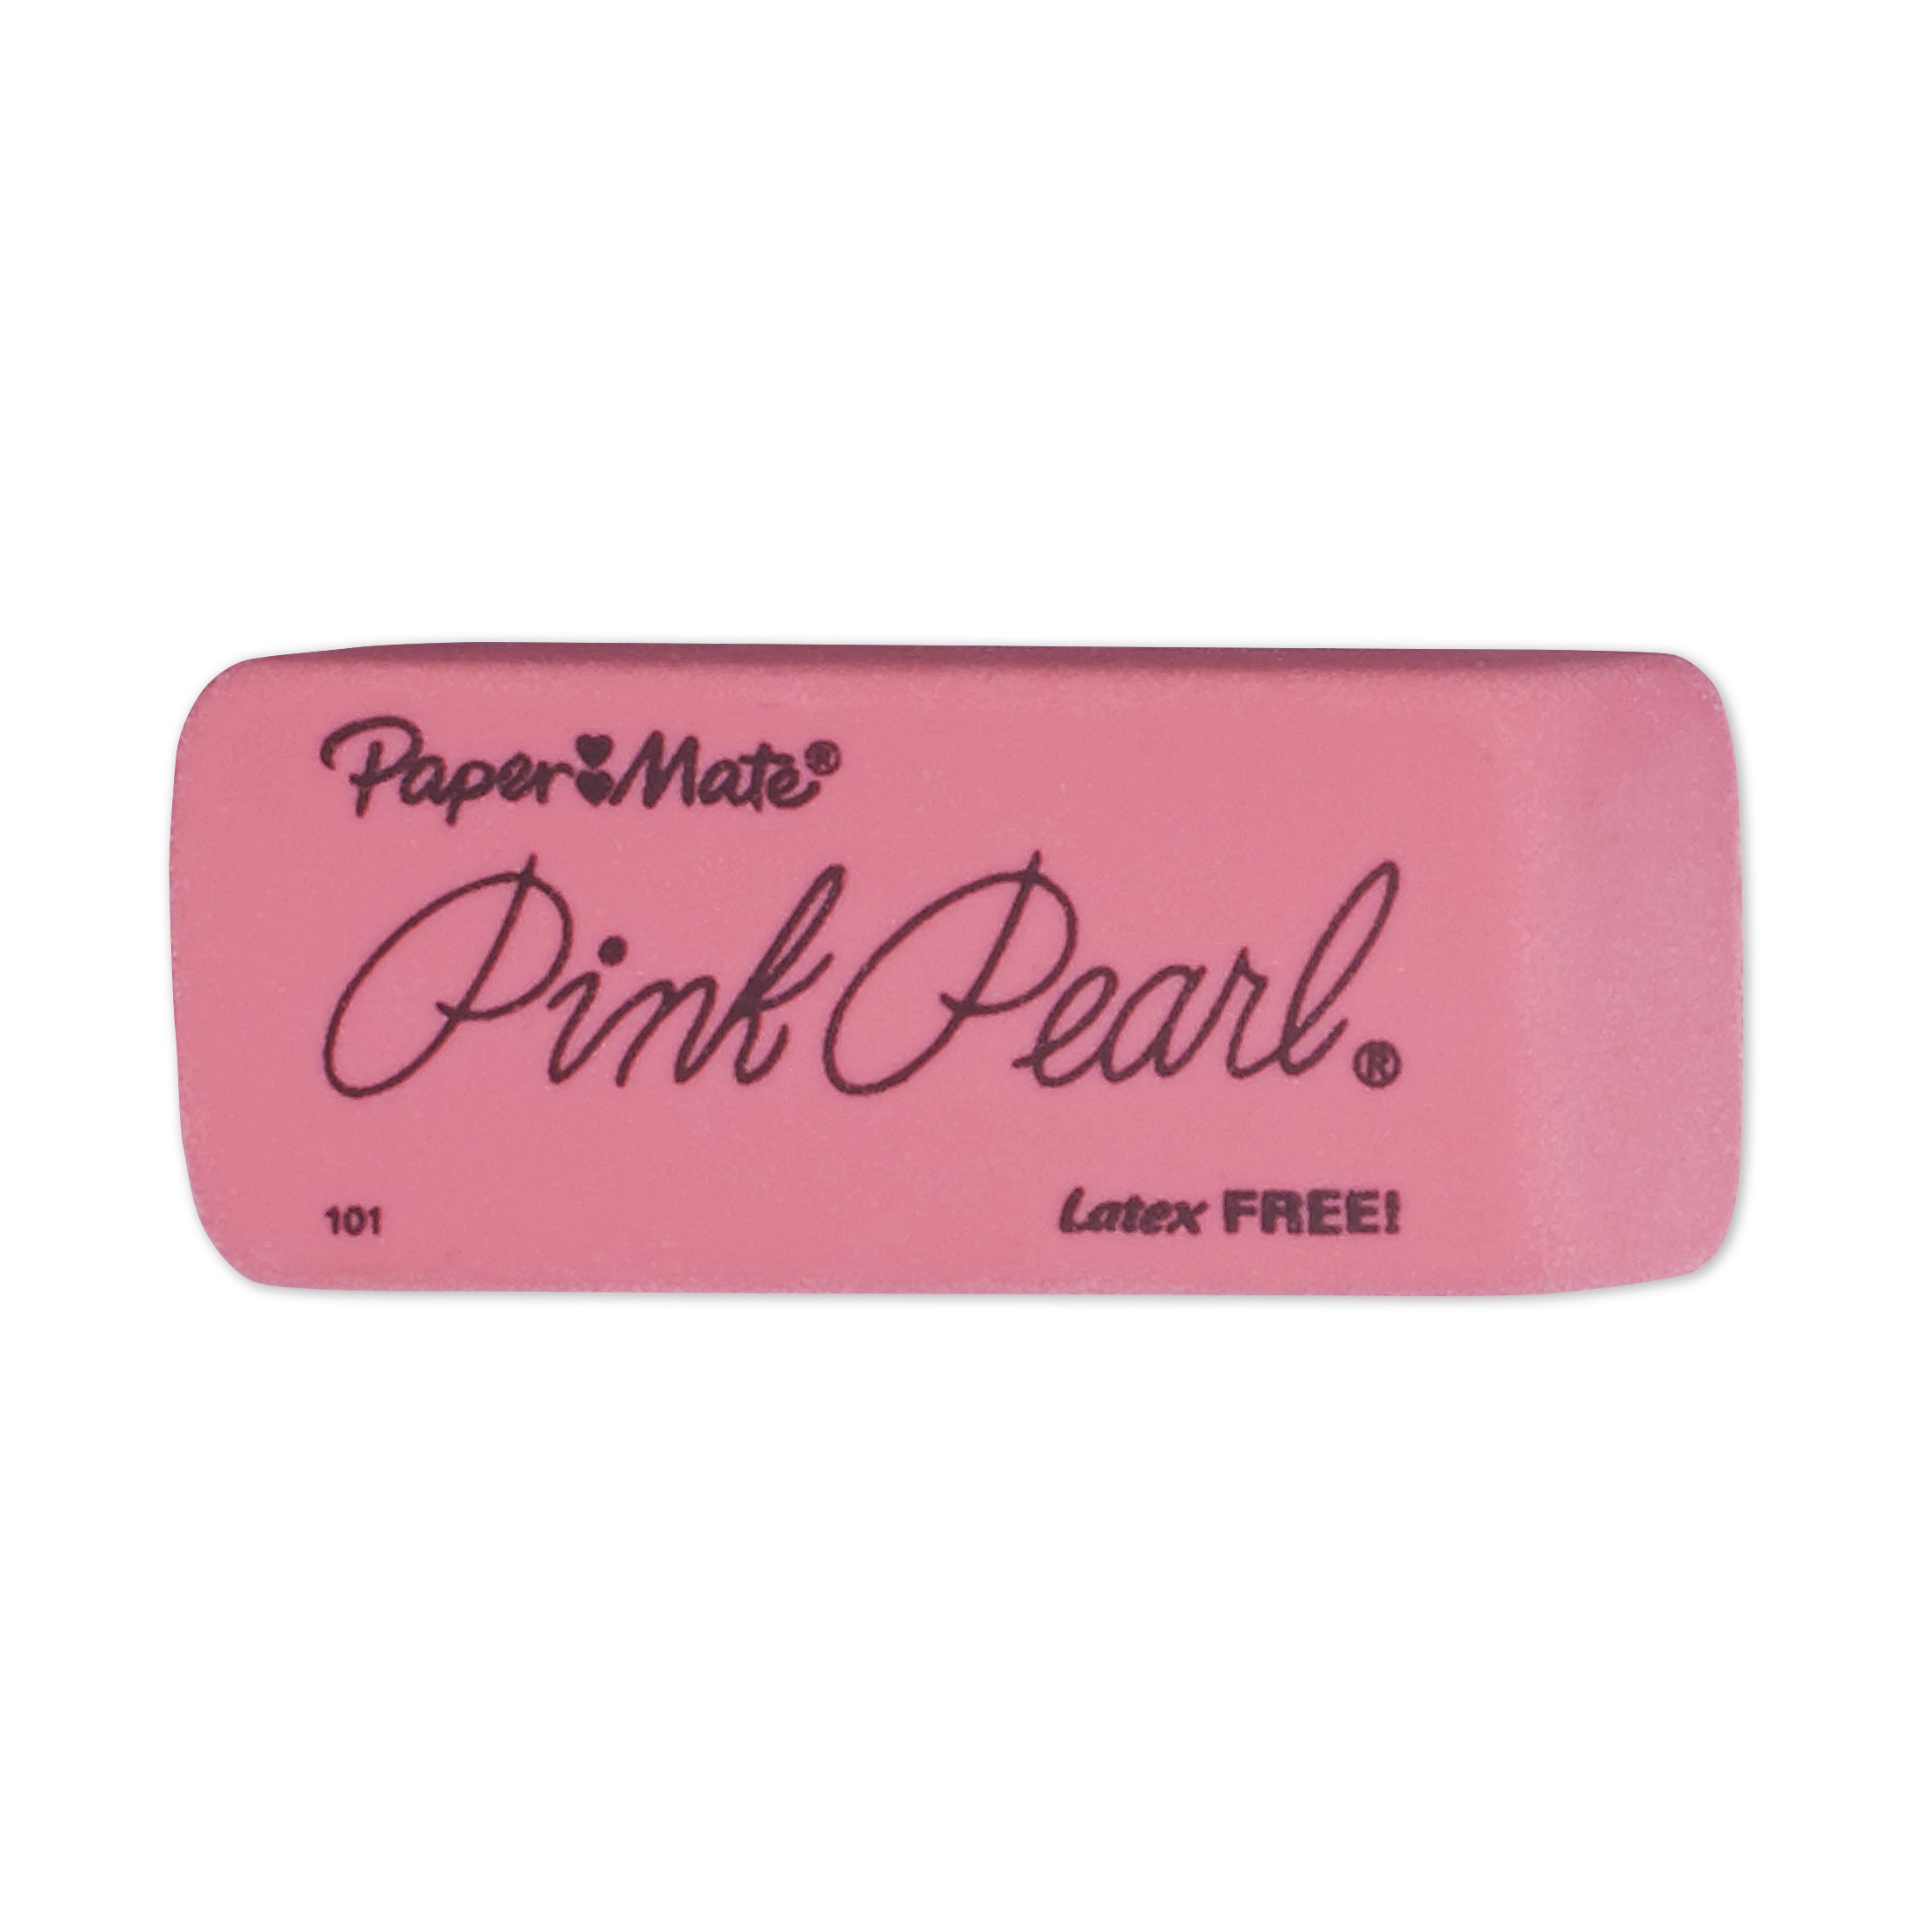 Paper Mate Pink Pearl Erasers, Large, 12 Count - image 2 of 8